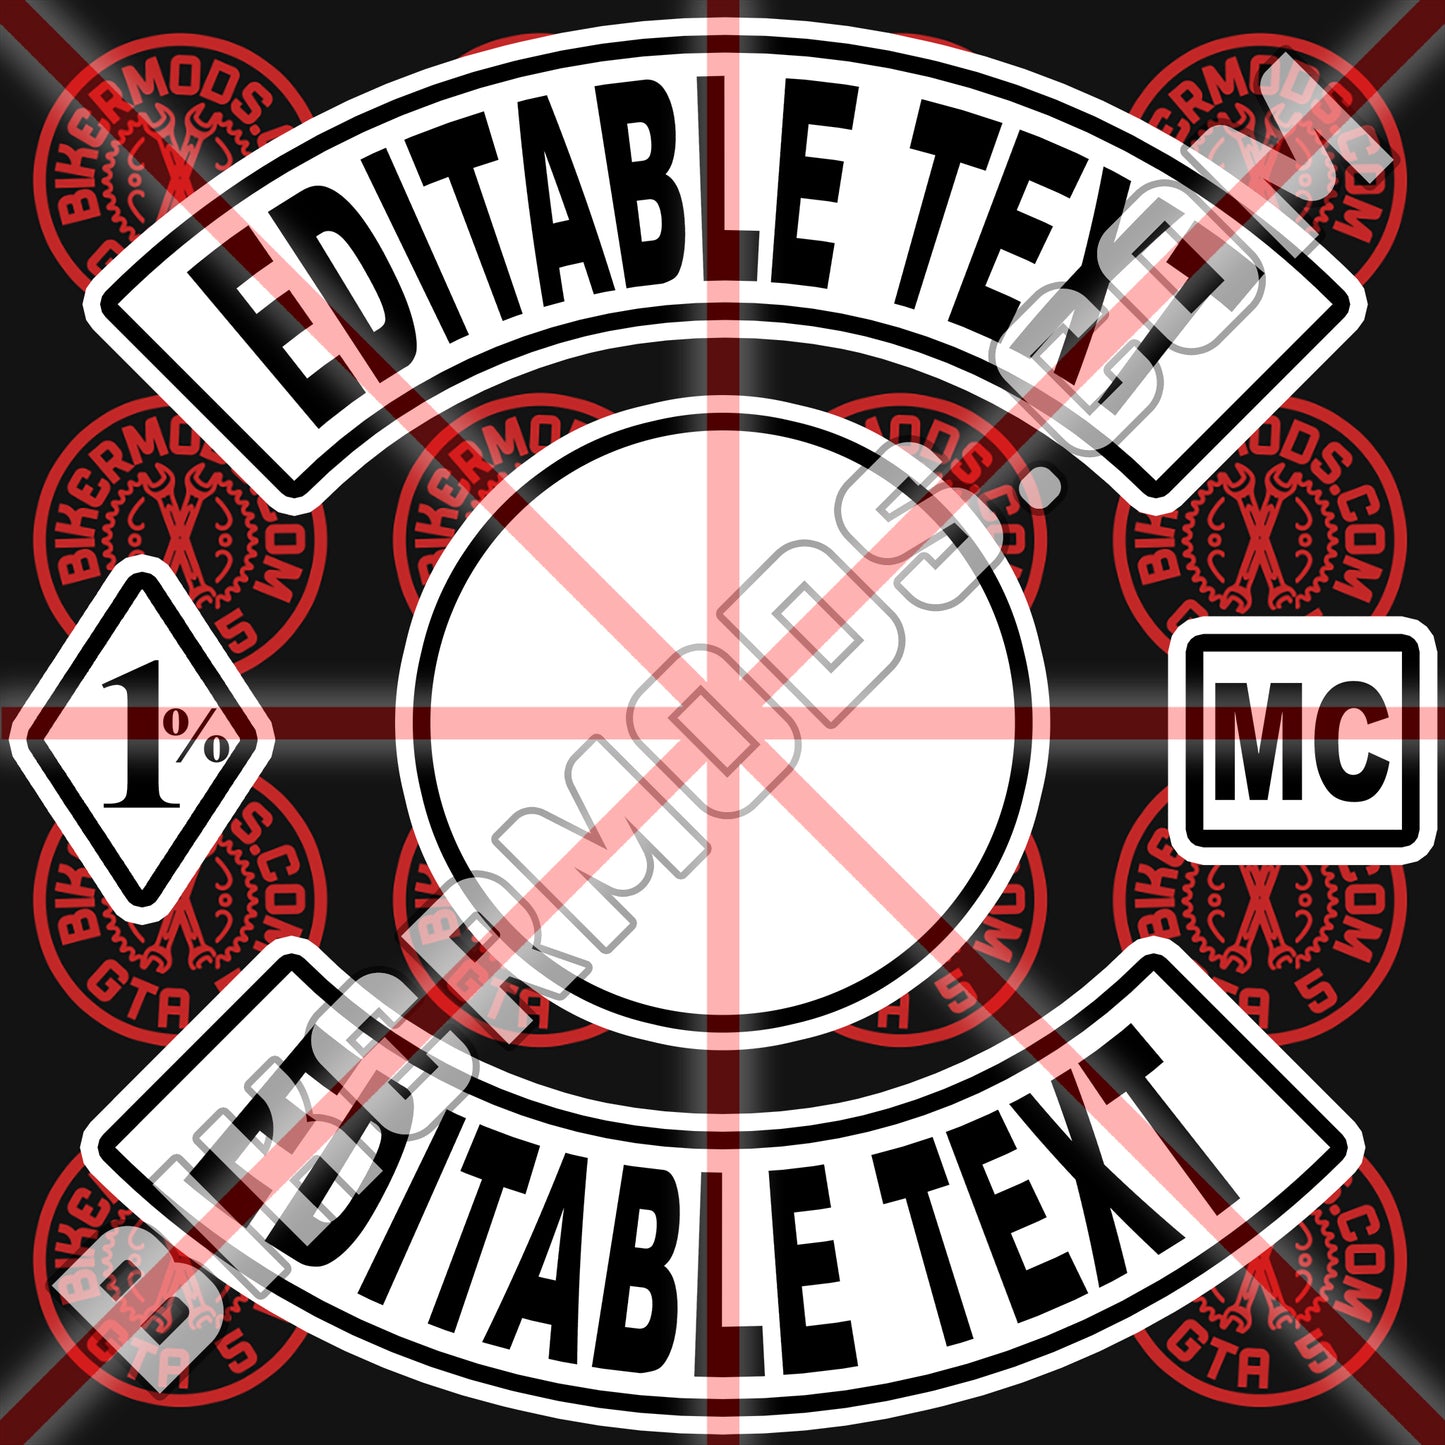 Motorcycle Club Creator Template (Photoshop PSD File) Easy to Edit the Text Yourself!